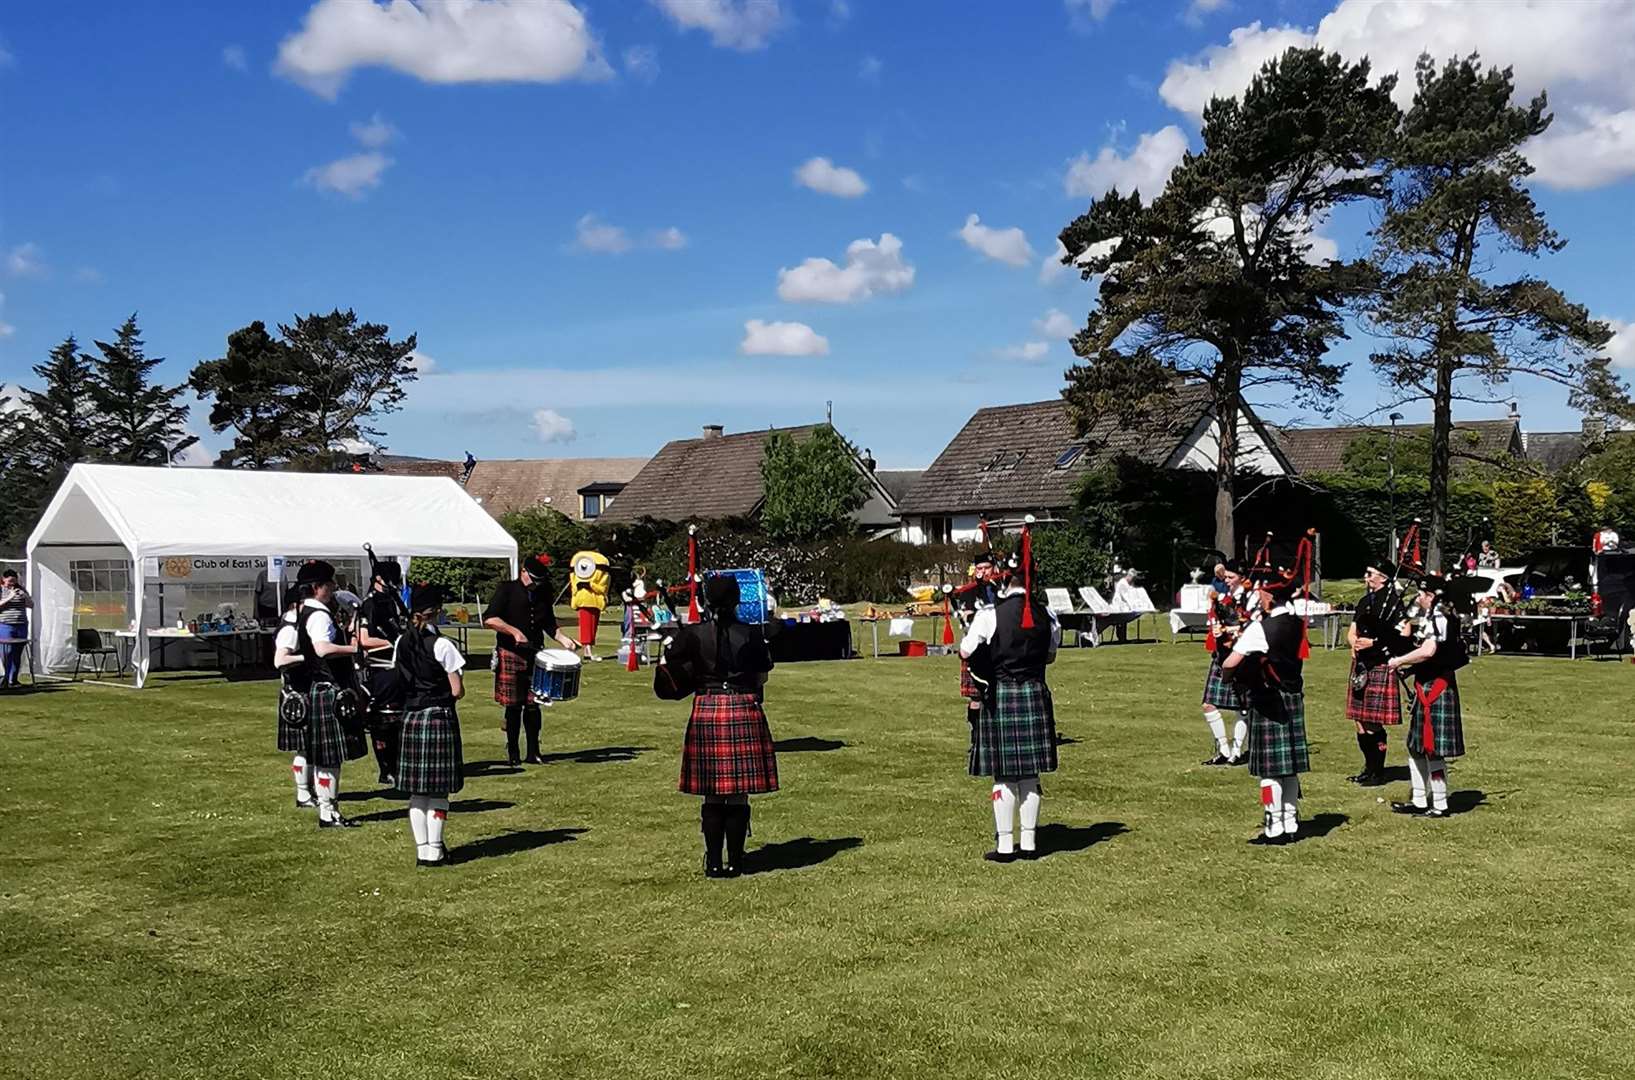 The community fete began with the Sutherland Schools pipe band playing which everyone enjoyed immensely.